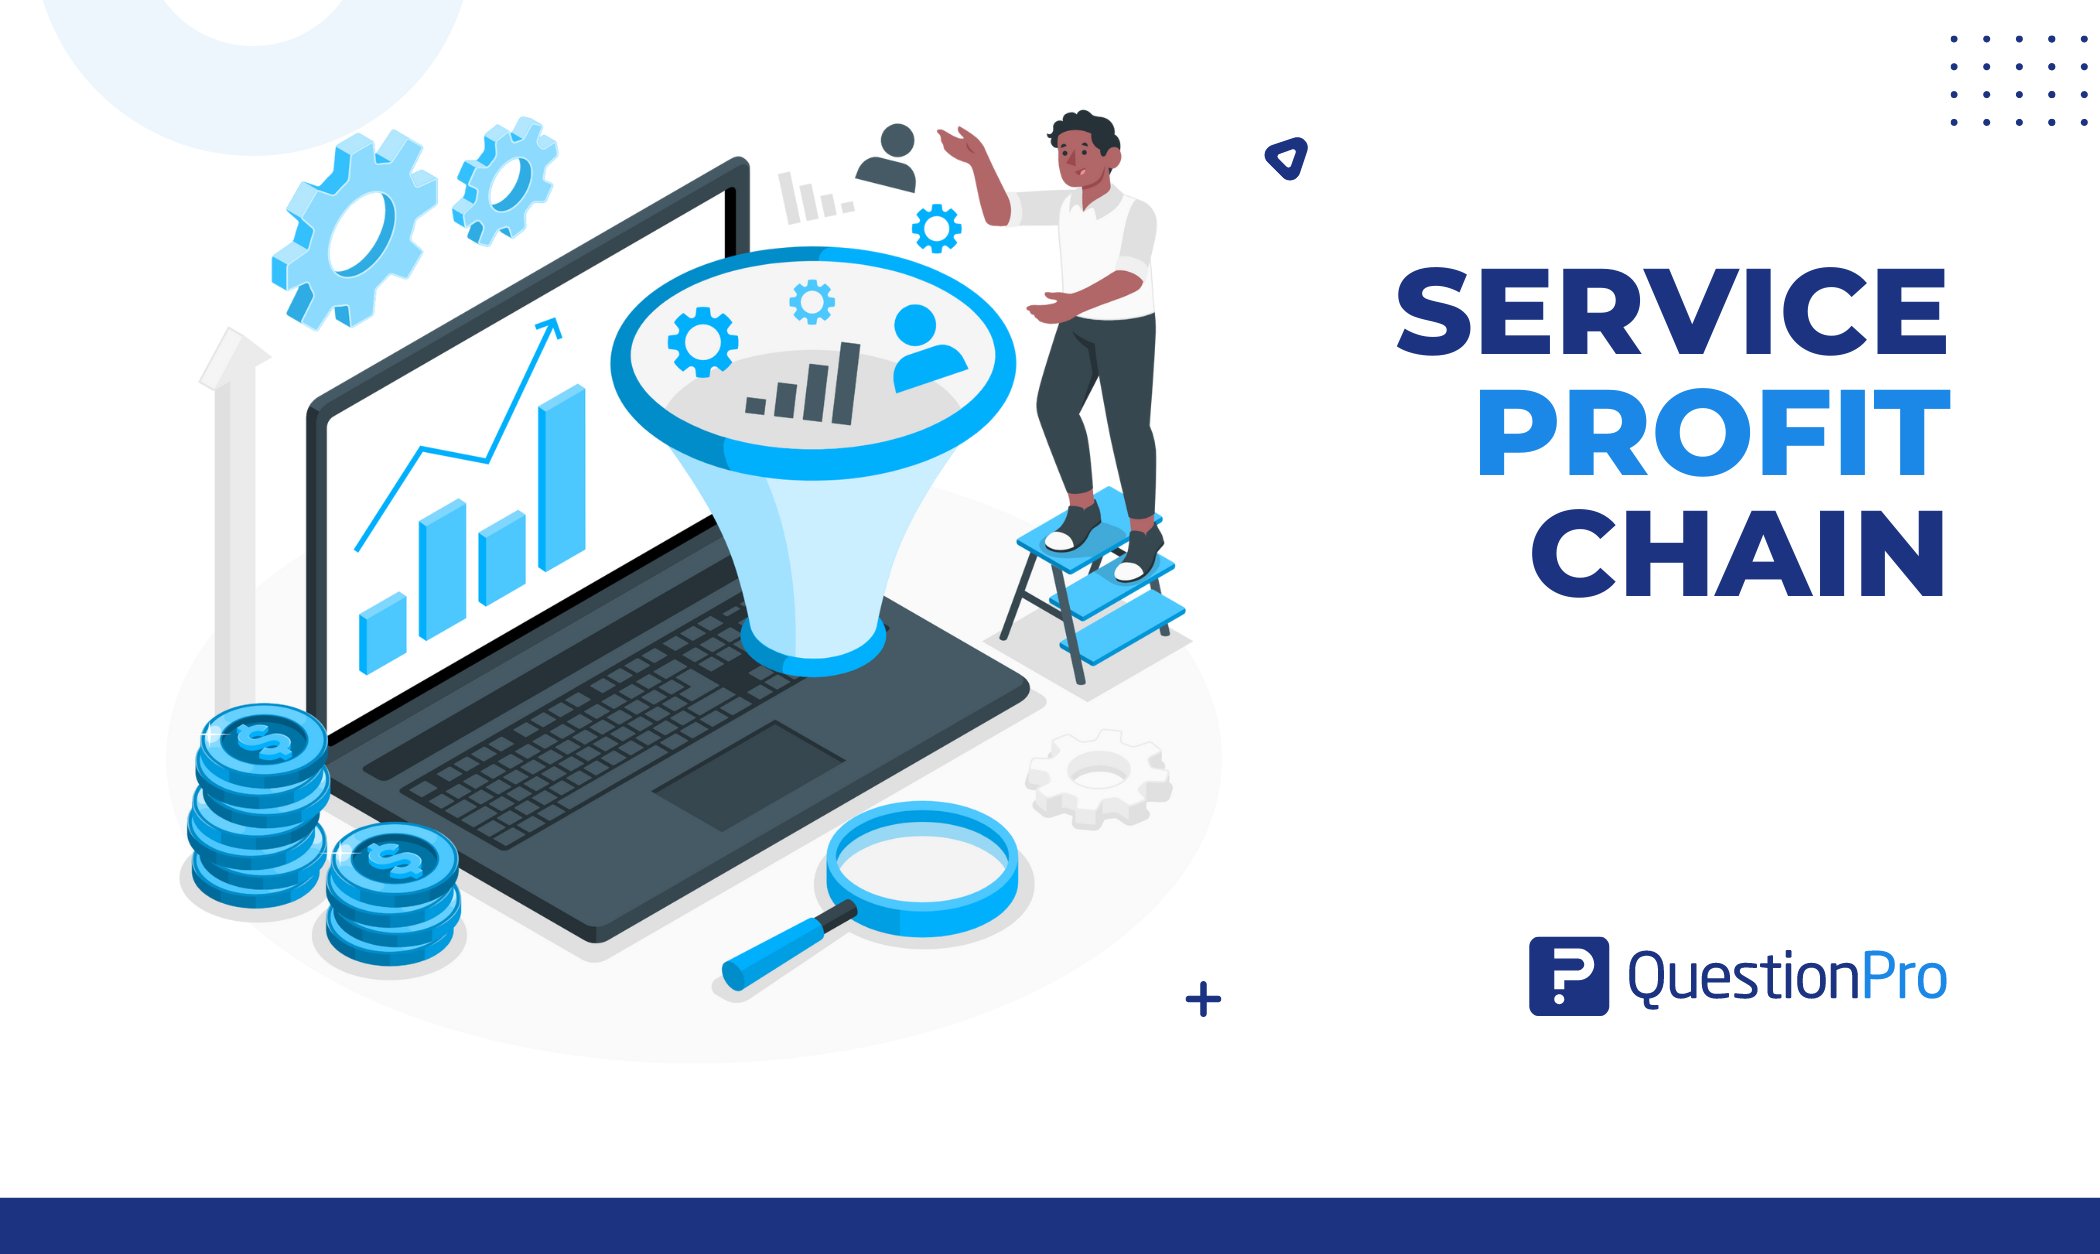 Find out how the Service Profit Chain increases profits by giving great customer service and keeping workers interested.